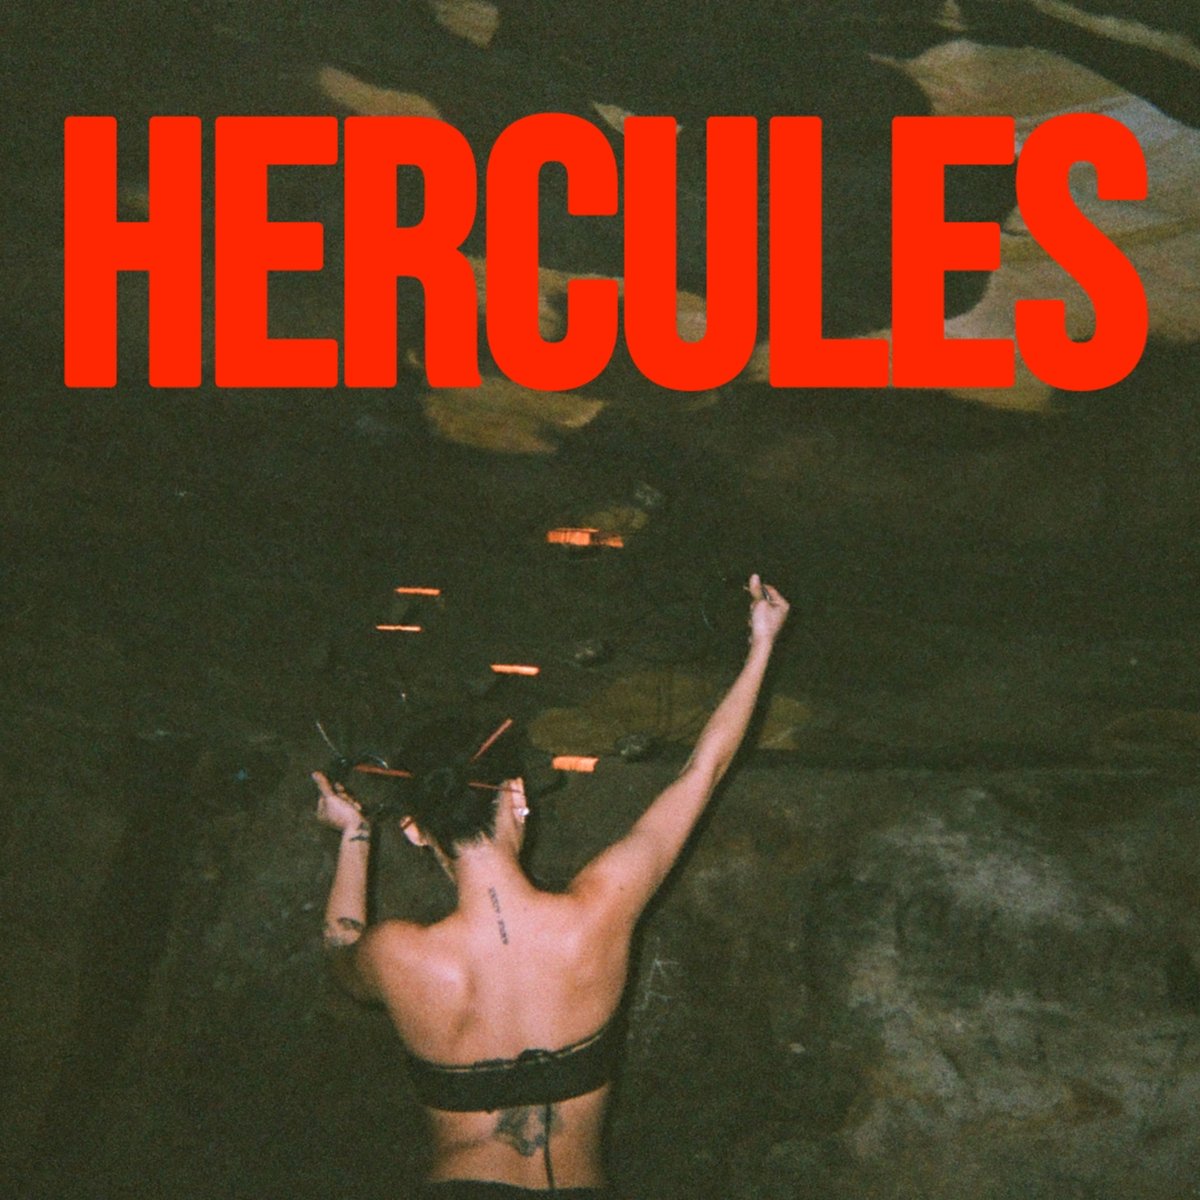 .@ArkyWaters is now treating fans to another sneak peek of his upcoming four-track EP with the release of new single 'Hercules': wp.me/p2iymy-t1x (cc: @Mammal_Sounds)